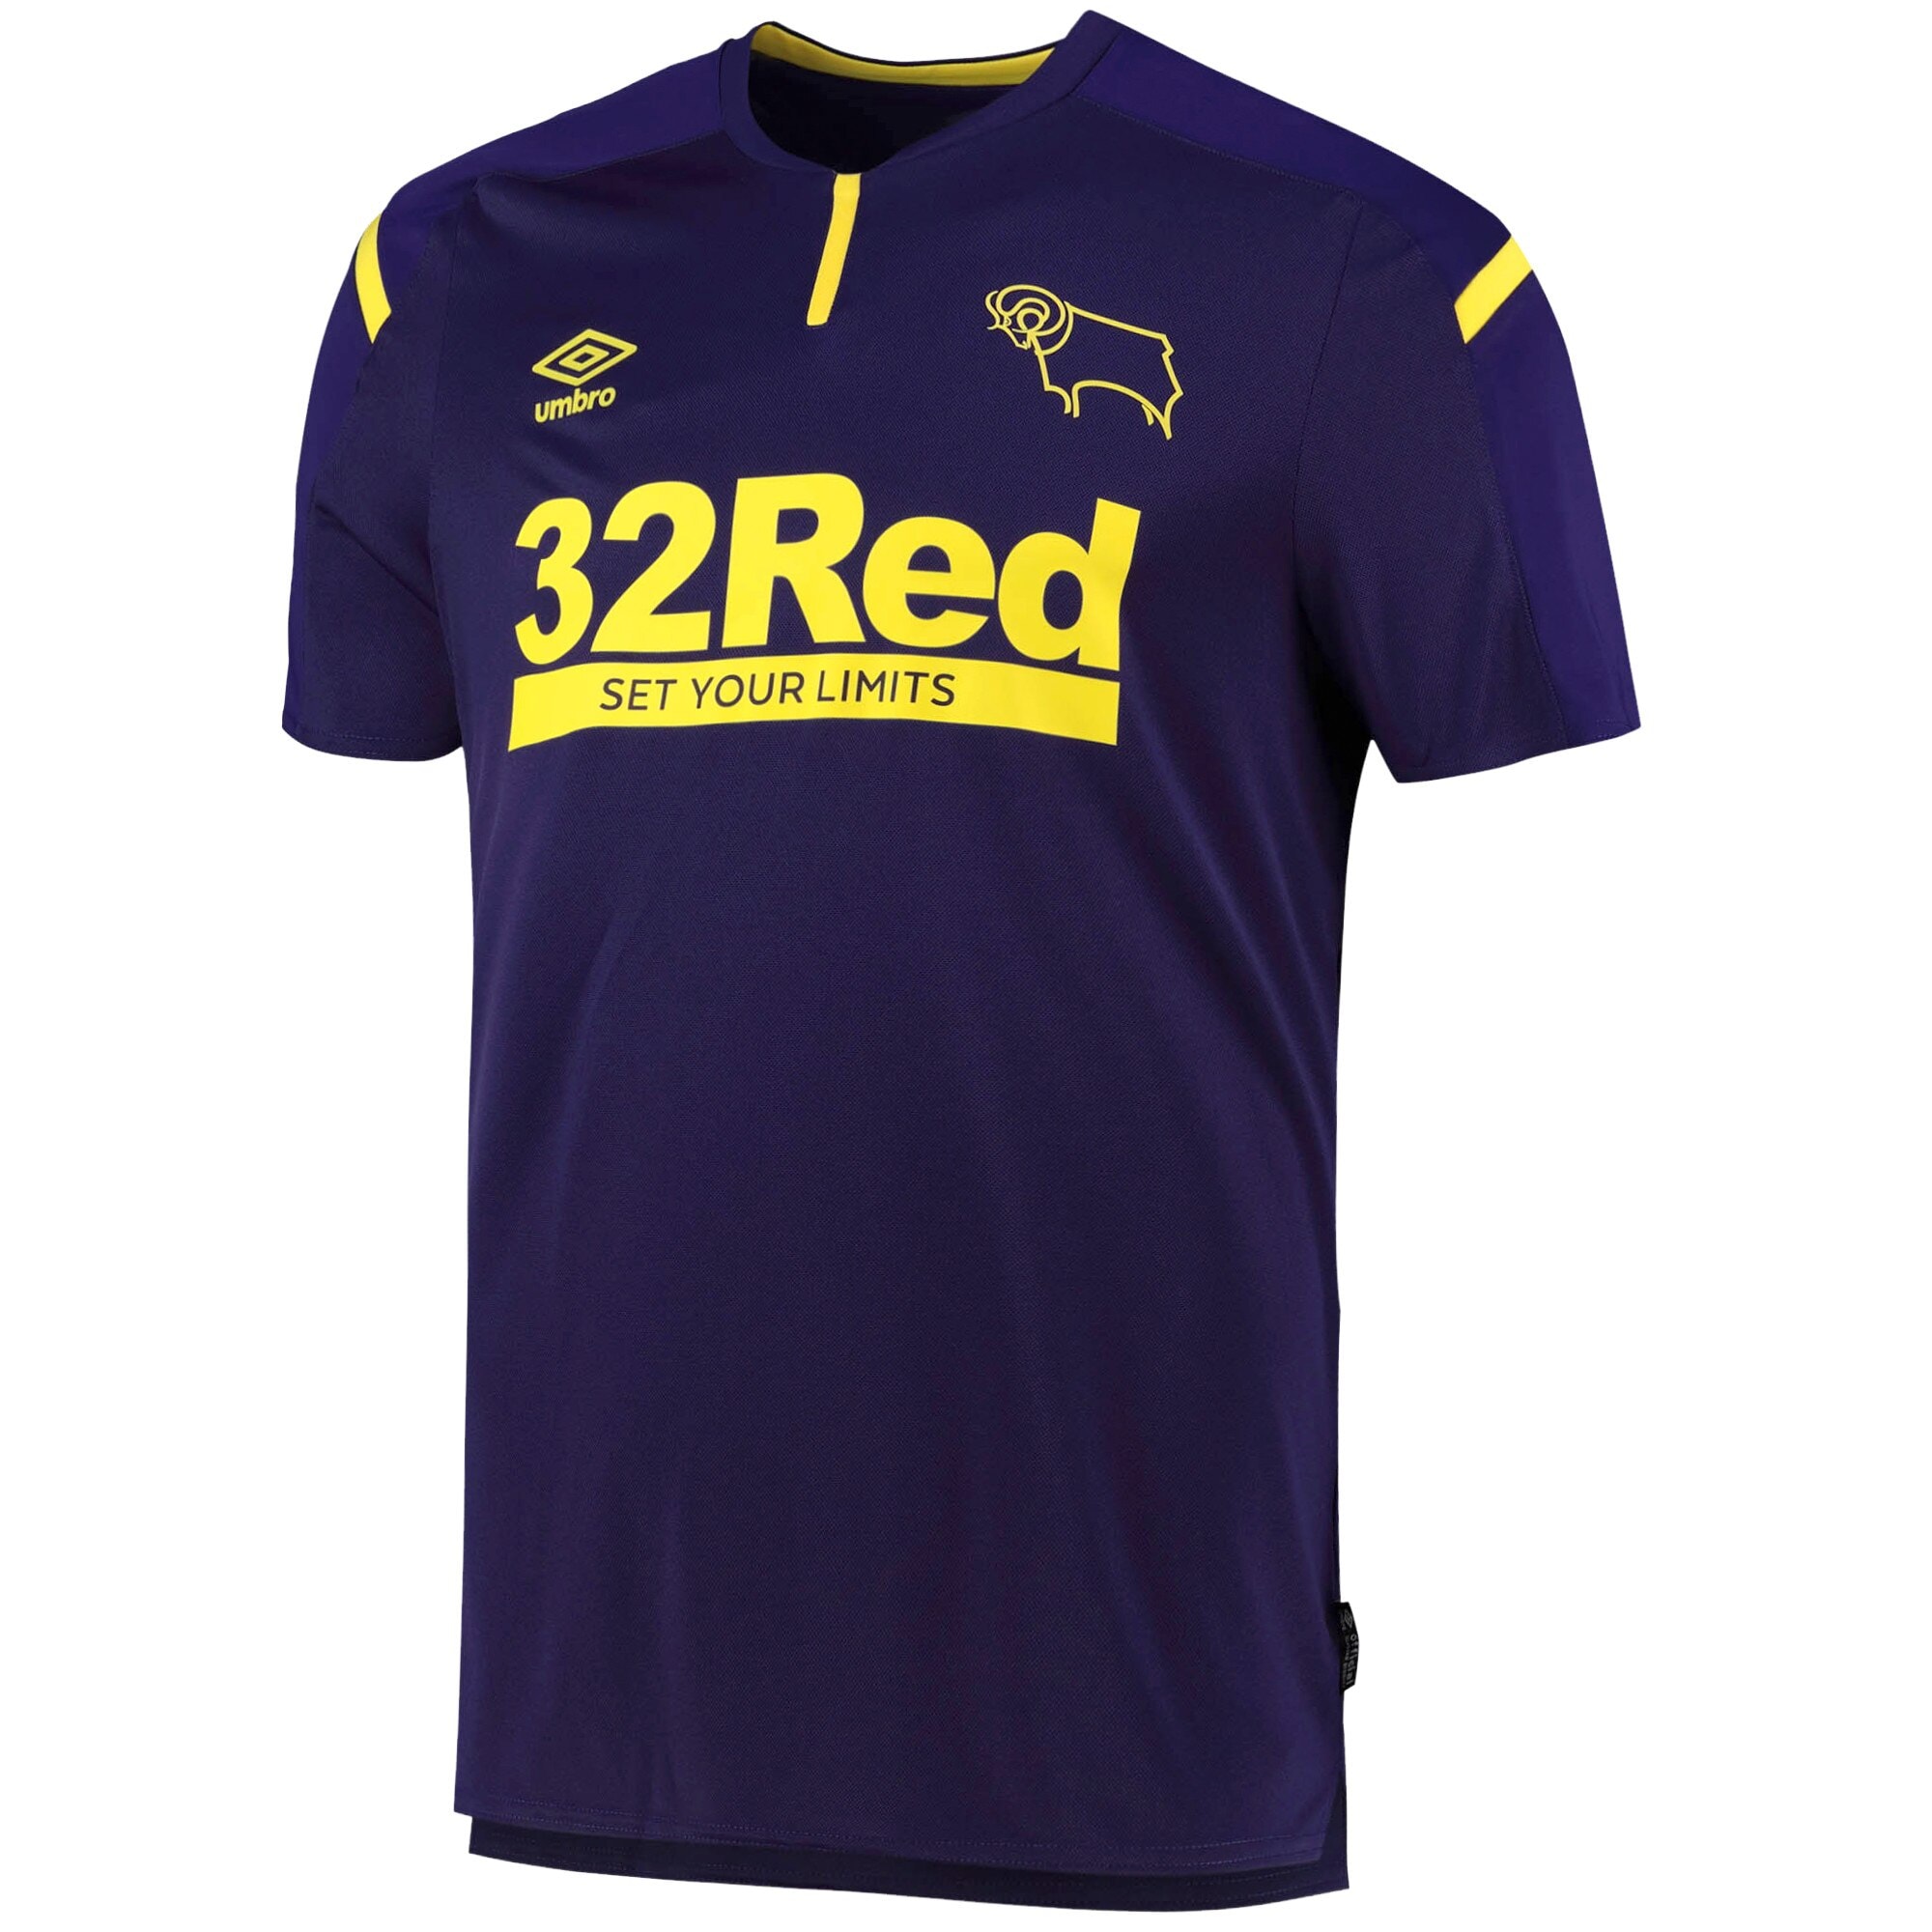 Derby County Third Shirt 2021-22 with Bird 8 printing